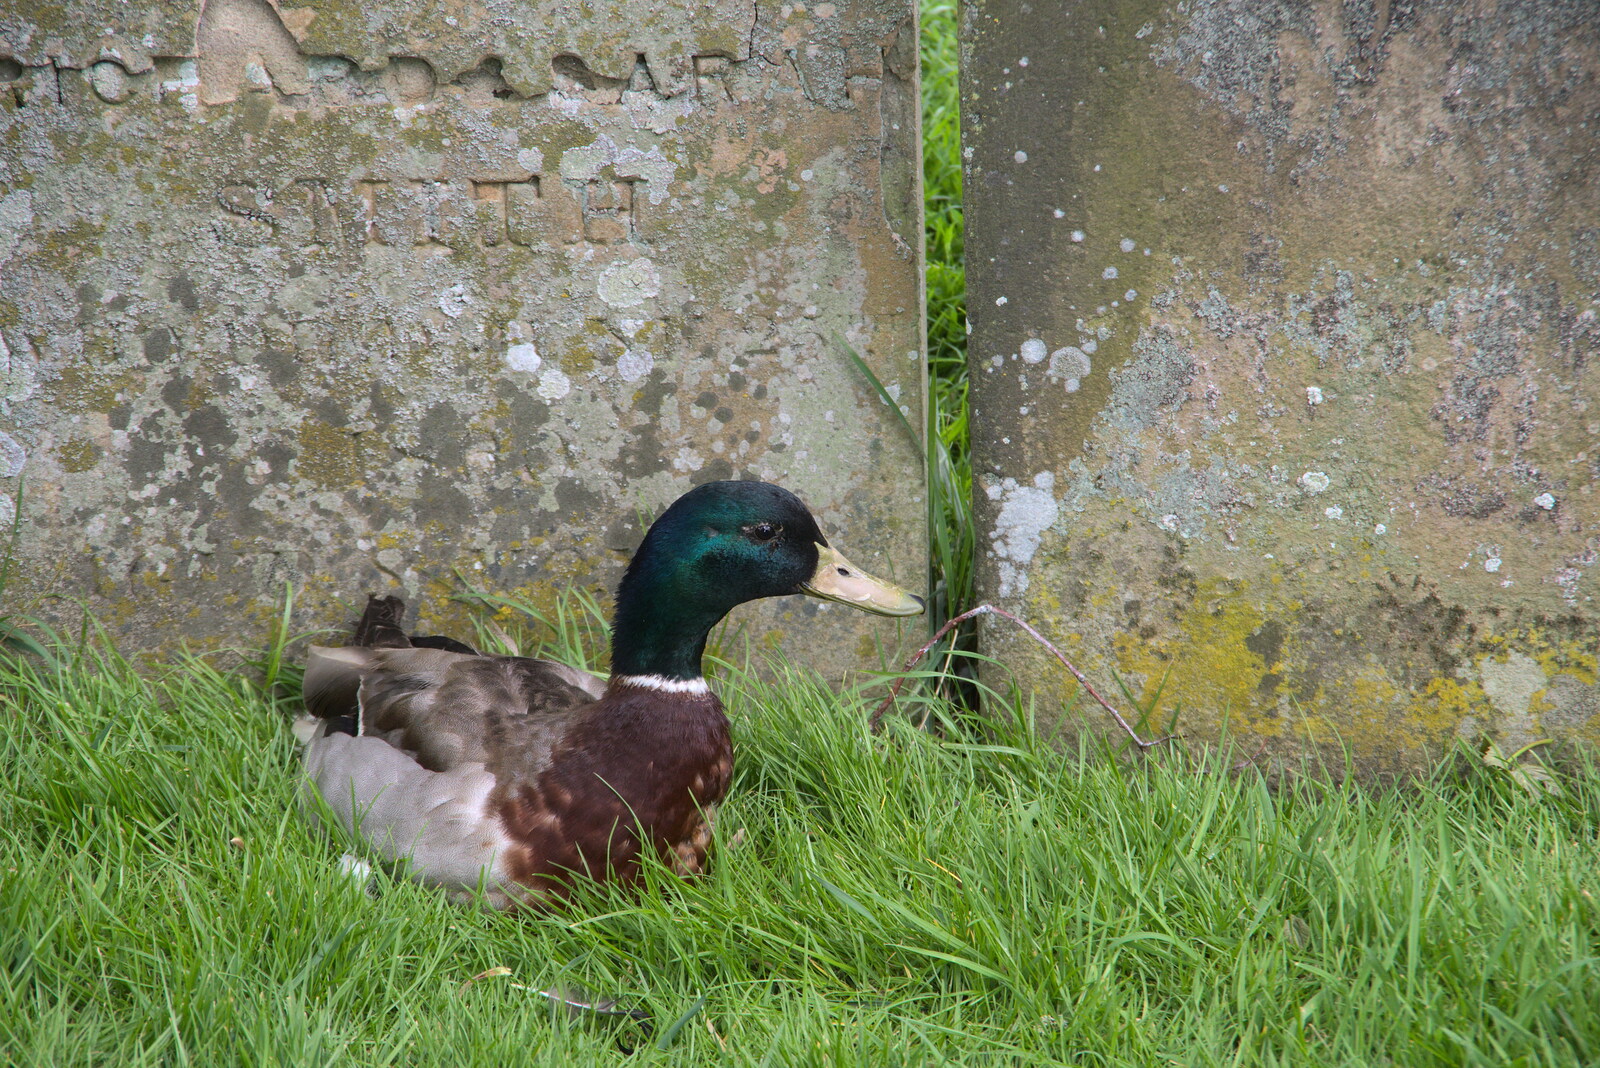 A duck nests by a gravestone from A Vaccination Afternoon, Swaffham, Norfolk - 9th May 2021